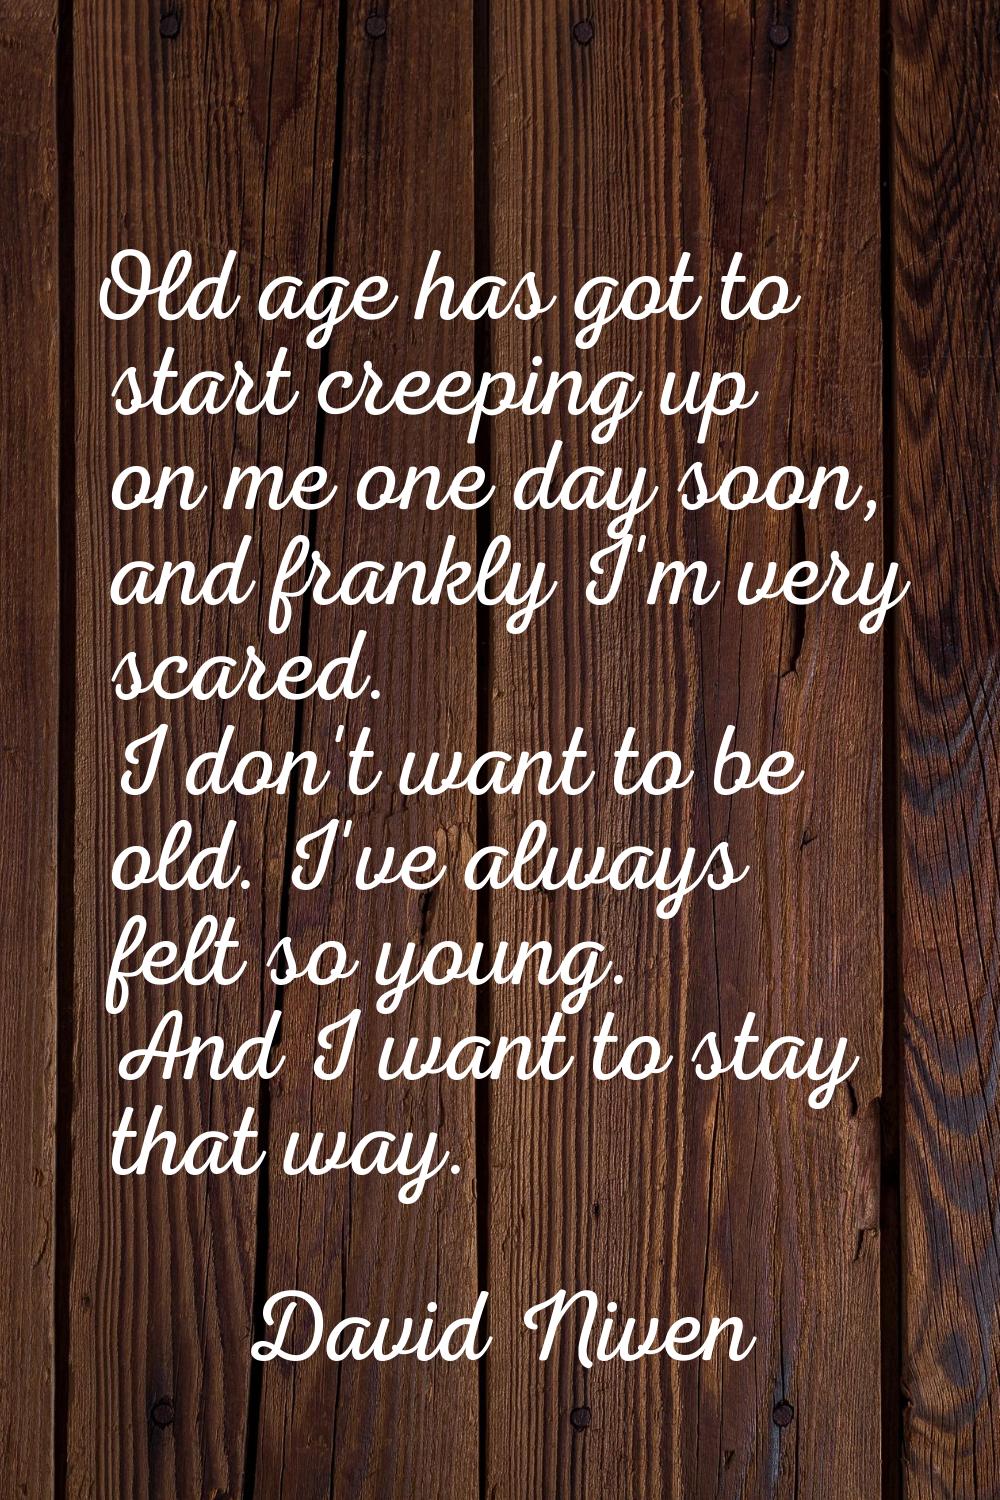 Old age has got to start creeping up on me one day soon, and frankly I'm very scared. I don't want 